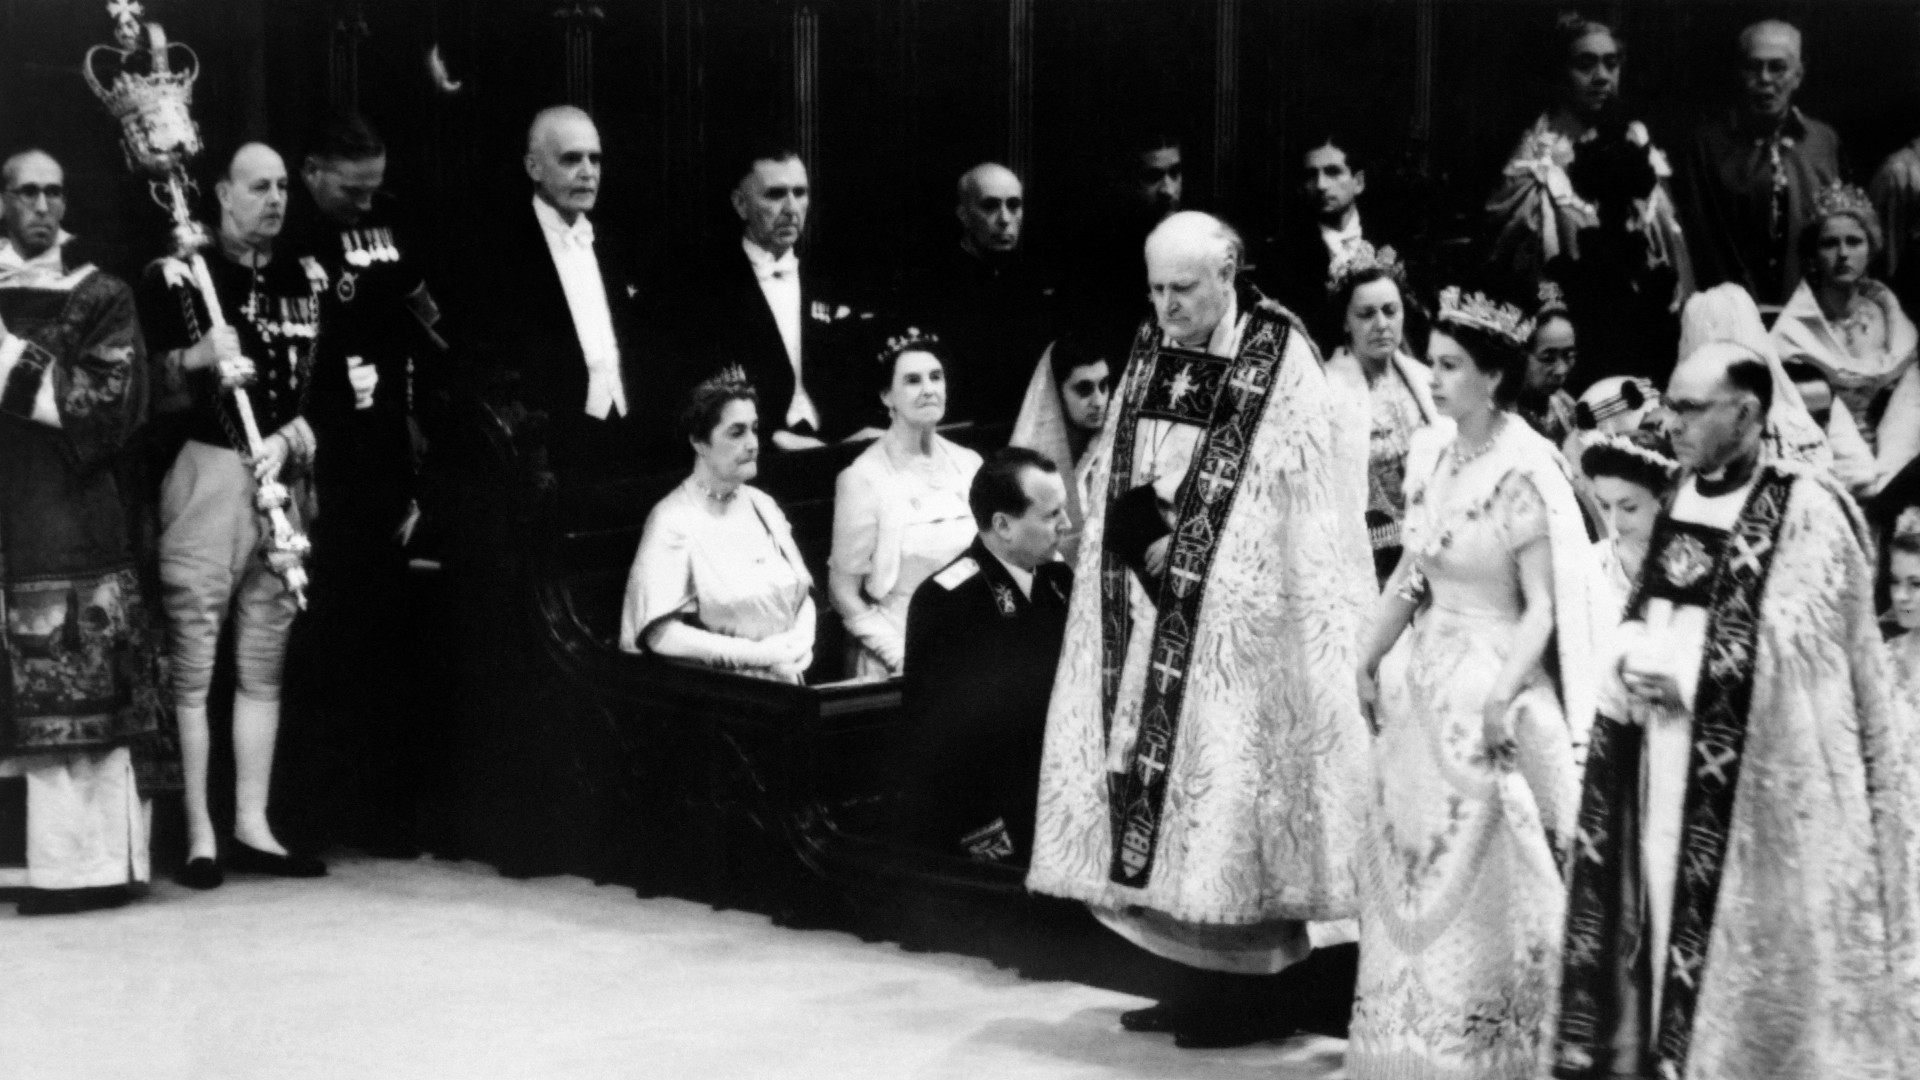 Queen Elizabeth II arrives for her coronation on 2 June 1953 at Westminster Abbey in London (AFP)